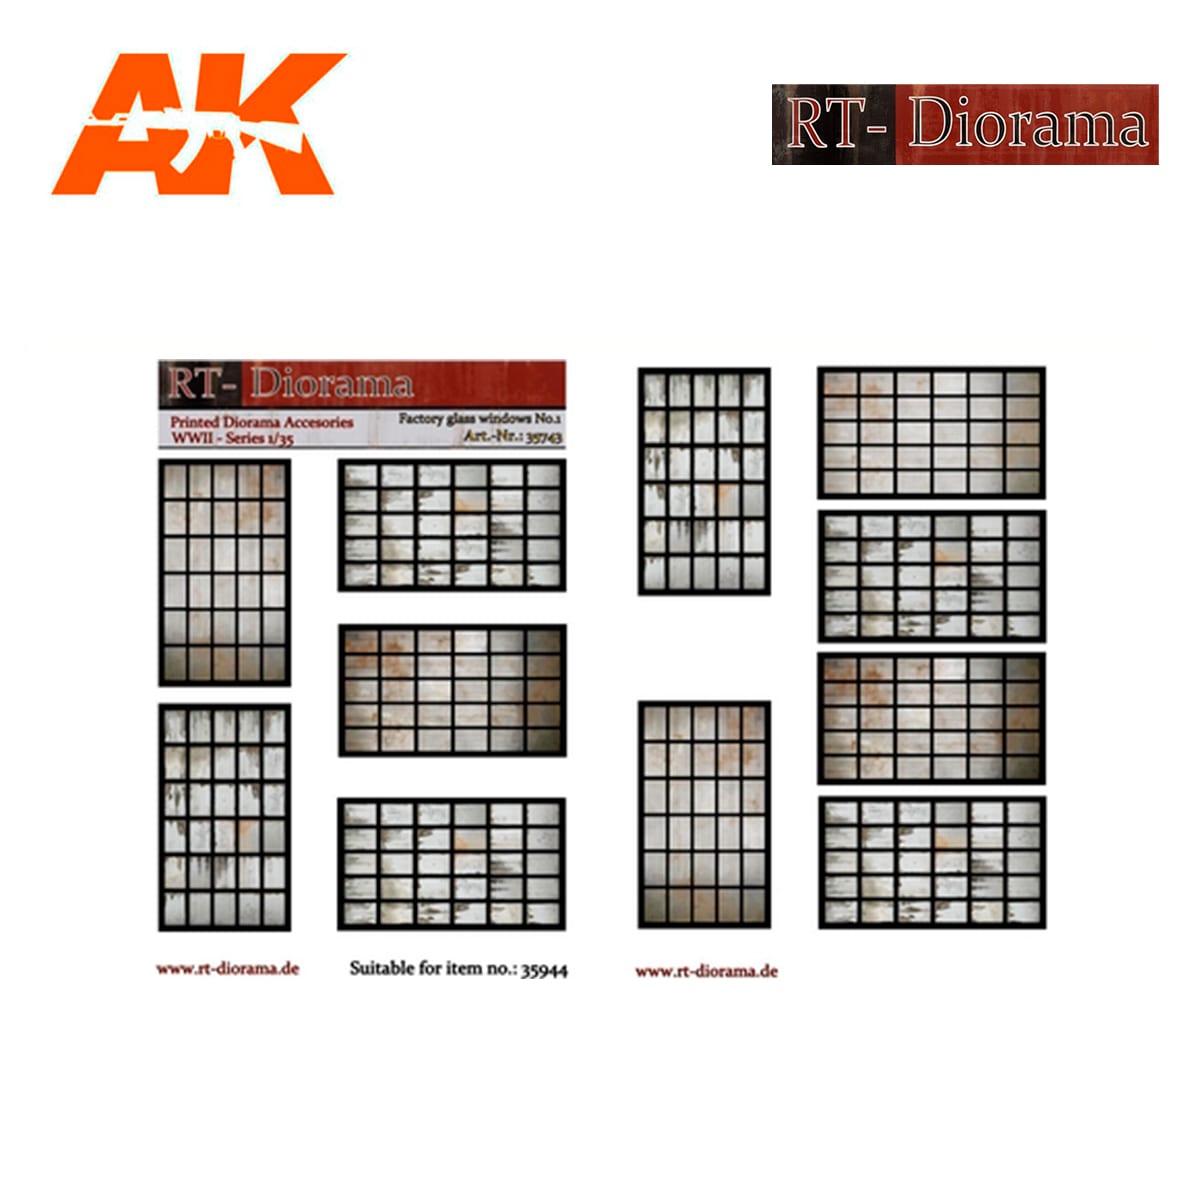 Printed Accesories: Factory glass windows Nr.1